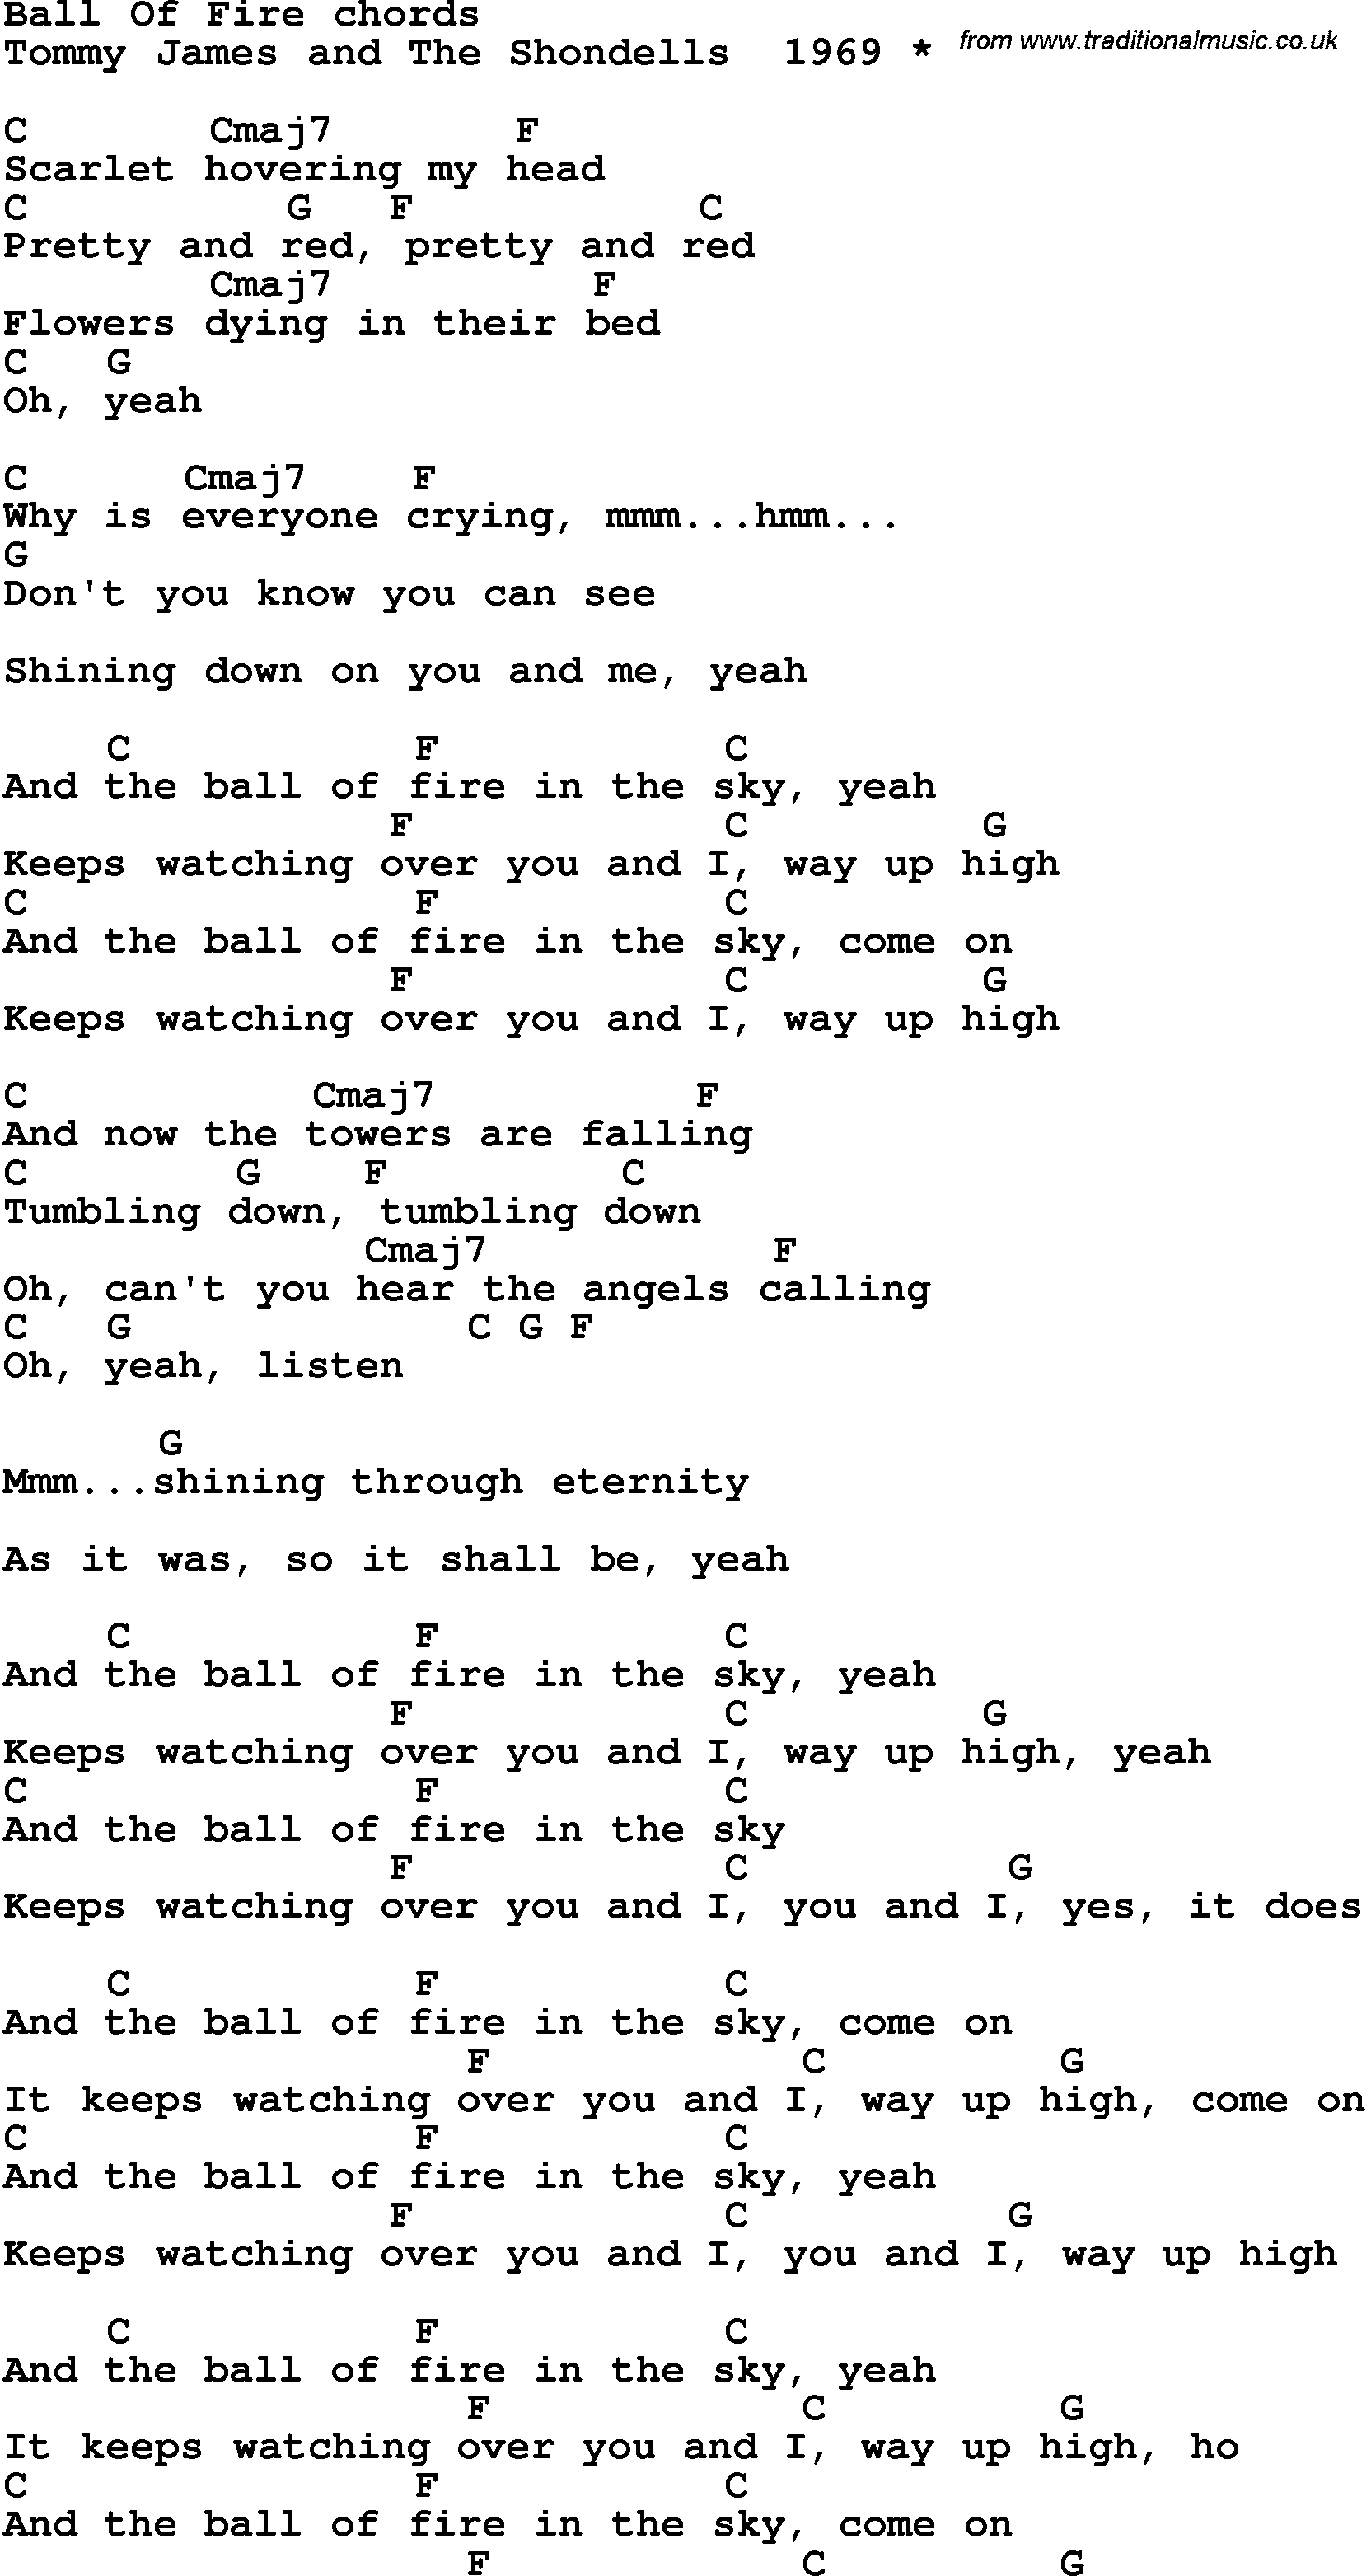 Song Lyrics with guitar chords for Ball Of Fire